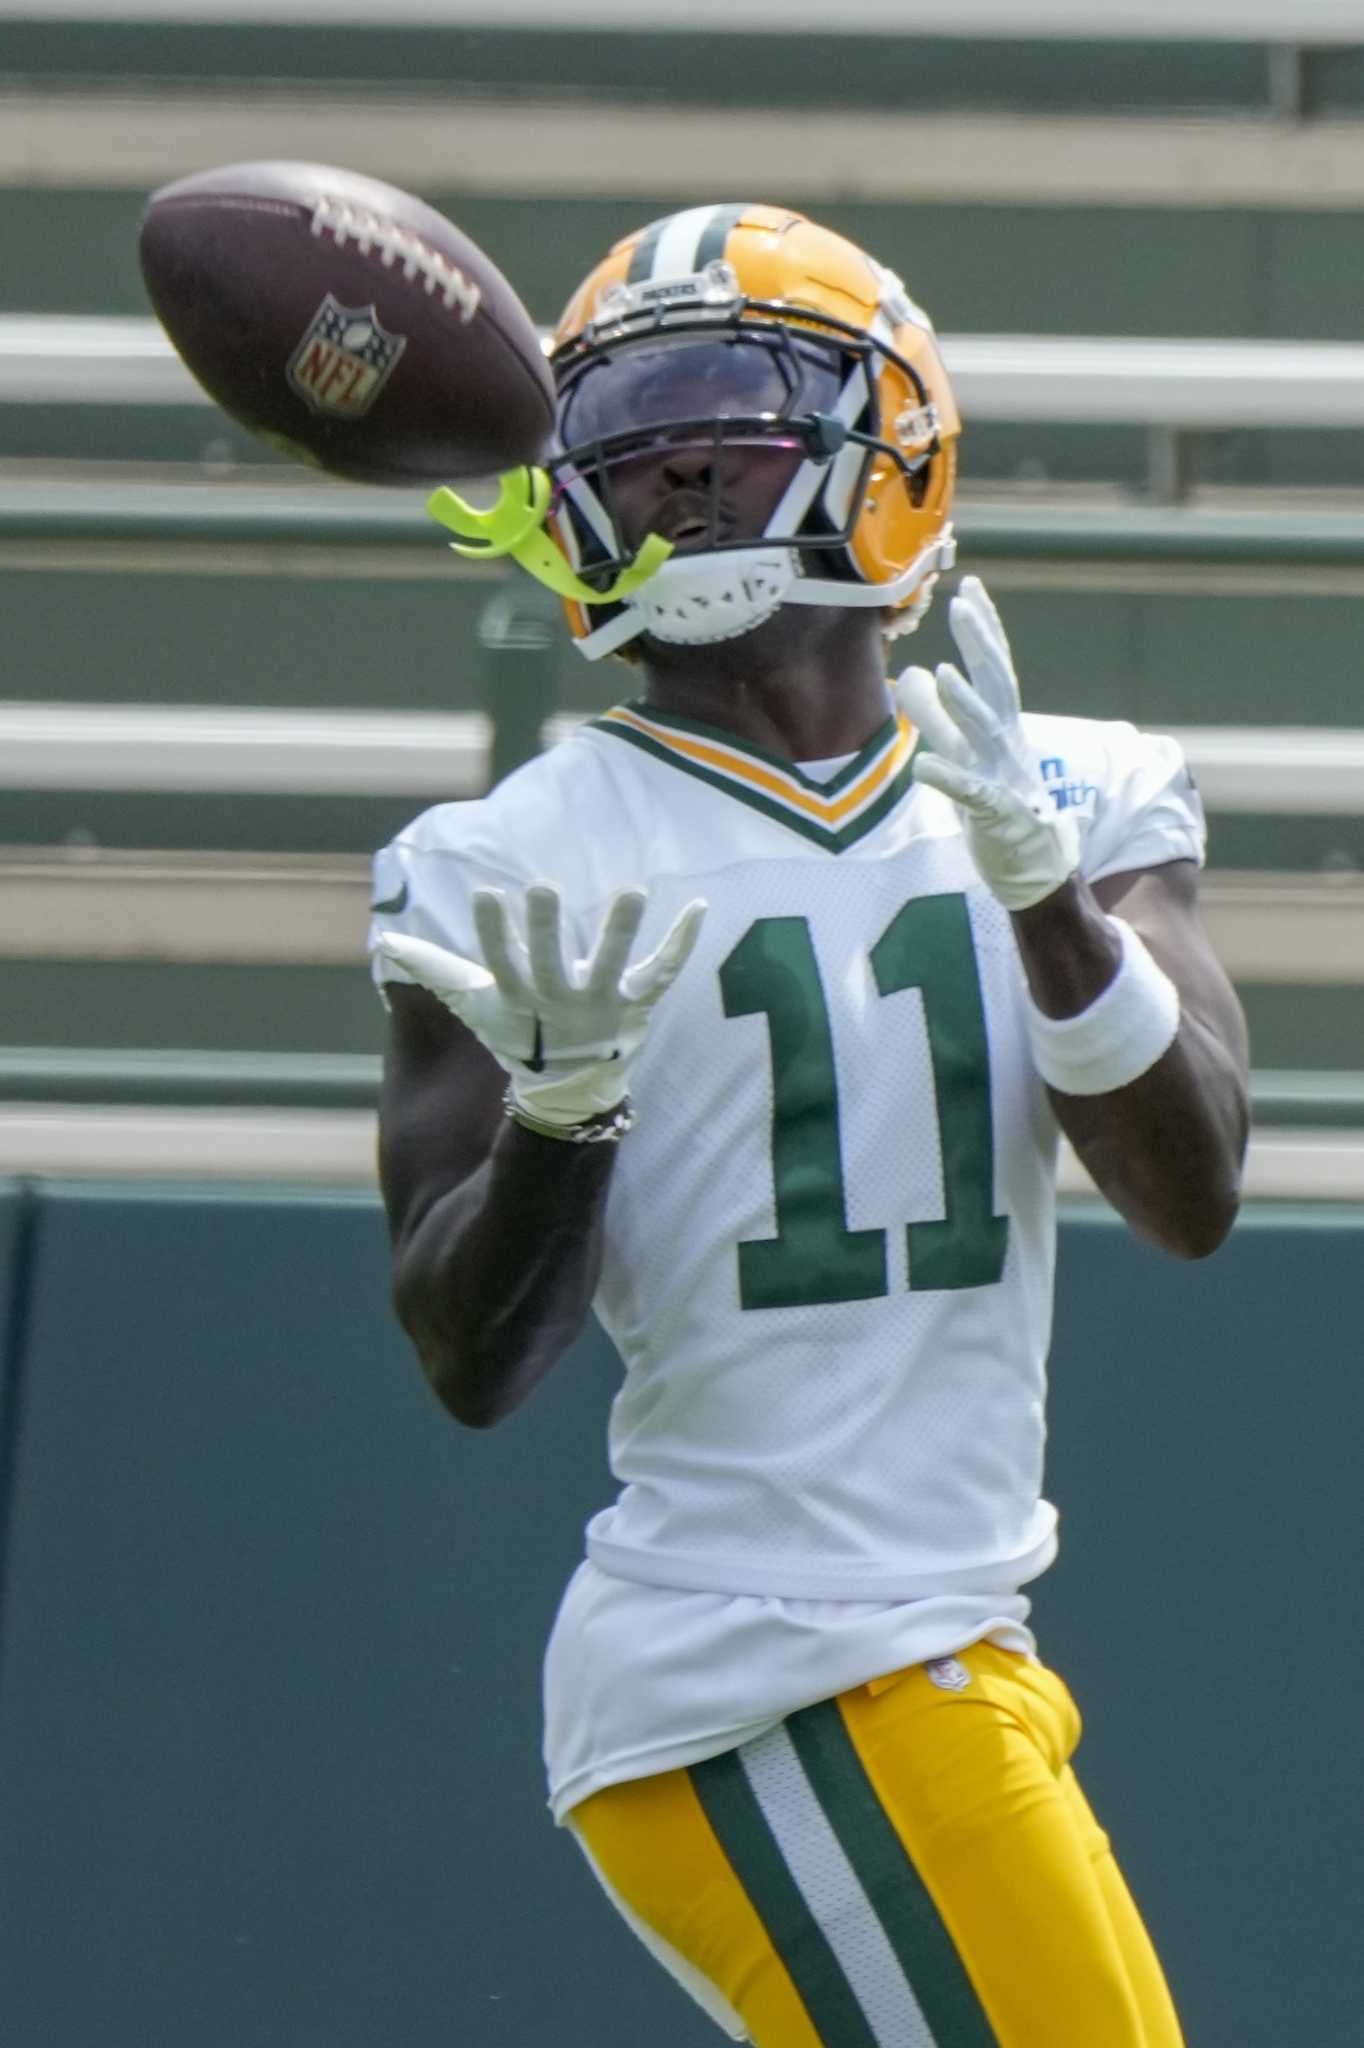 Packers' receiving depth should give Jordan Love options even if nobody emerges as No. 1 target